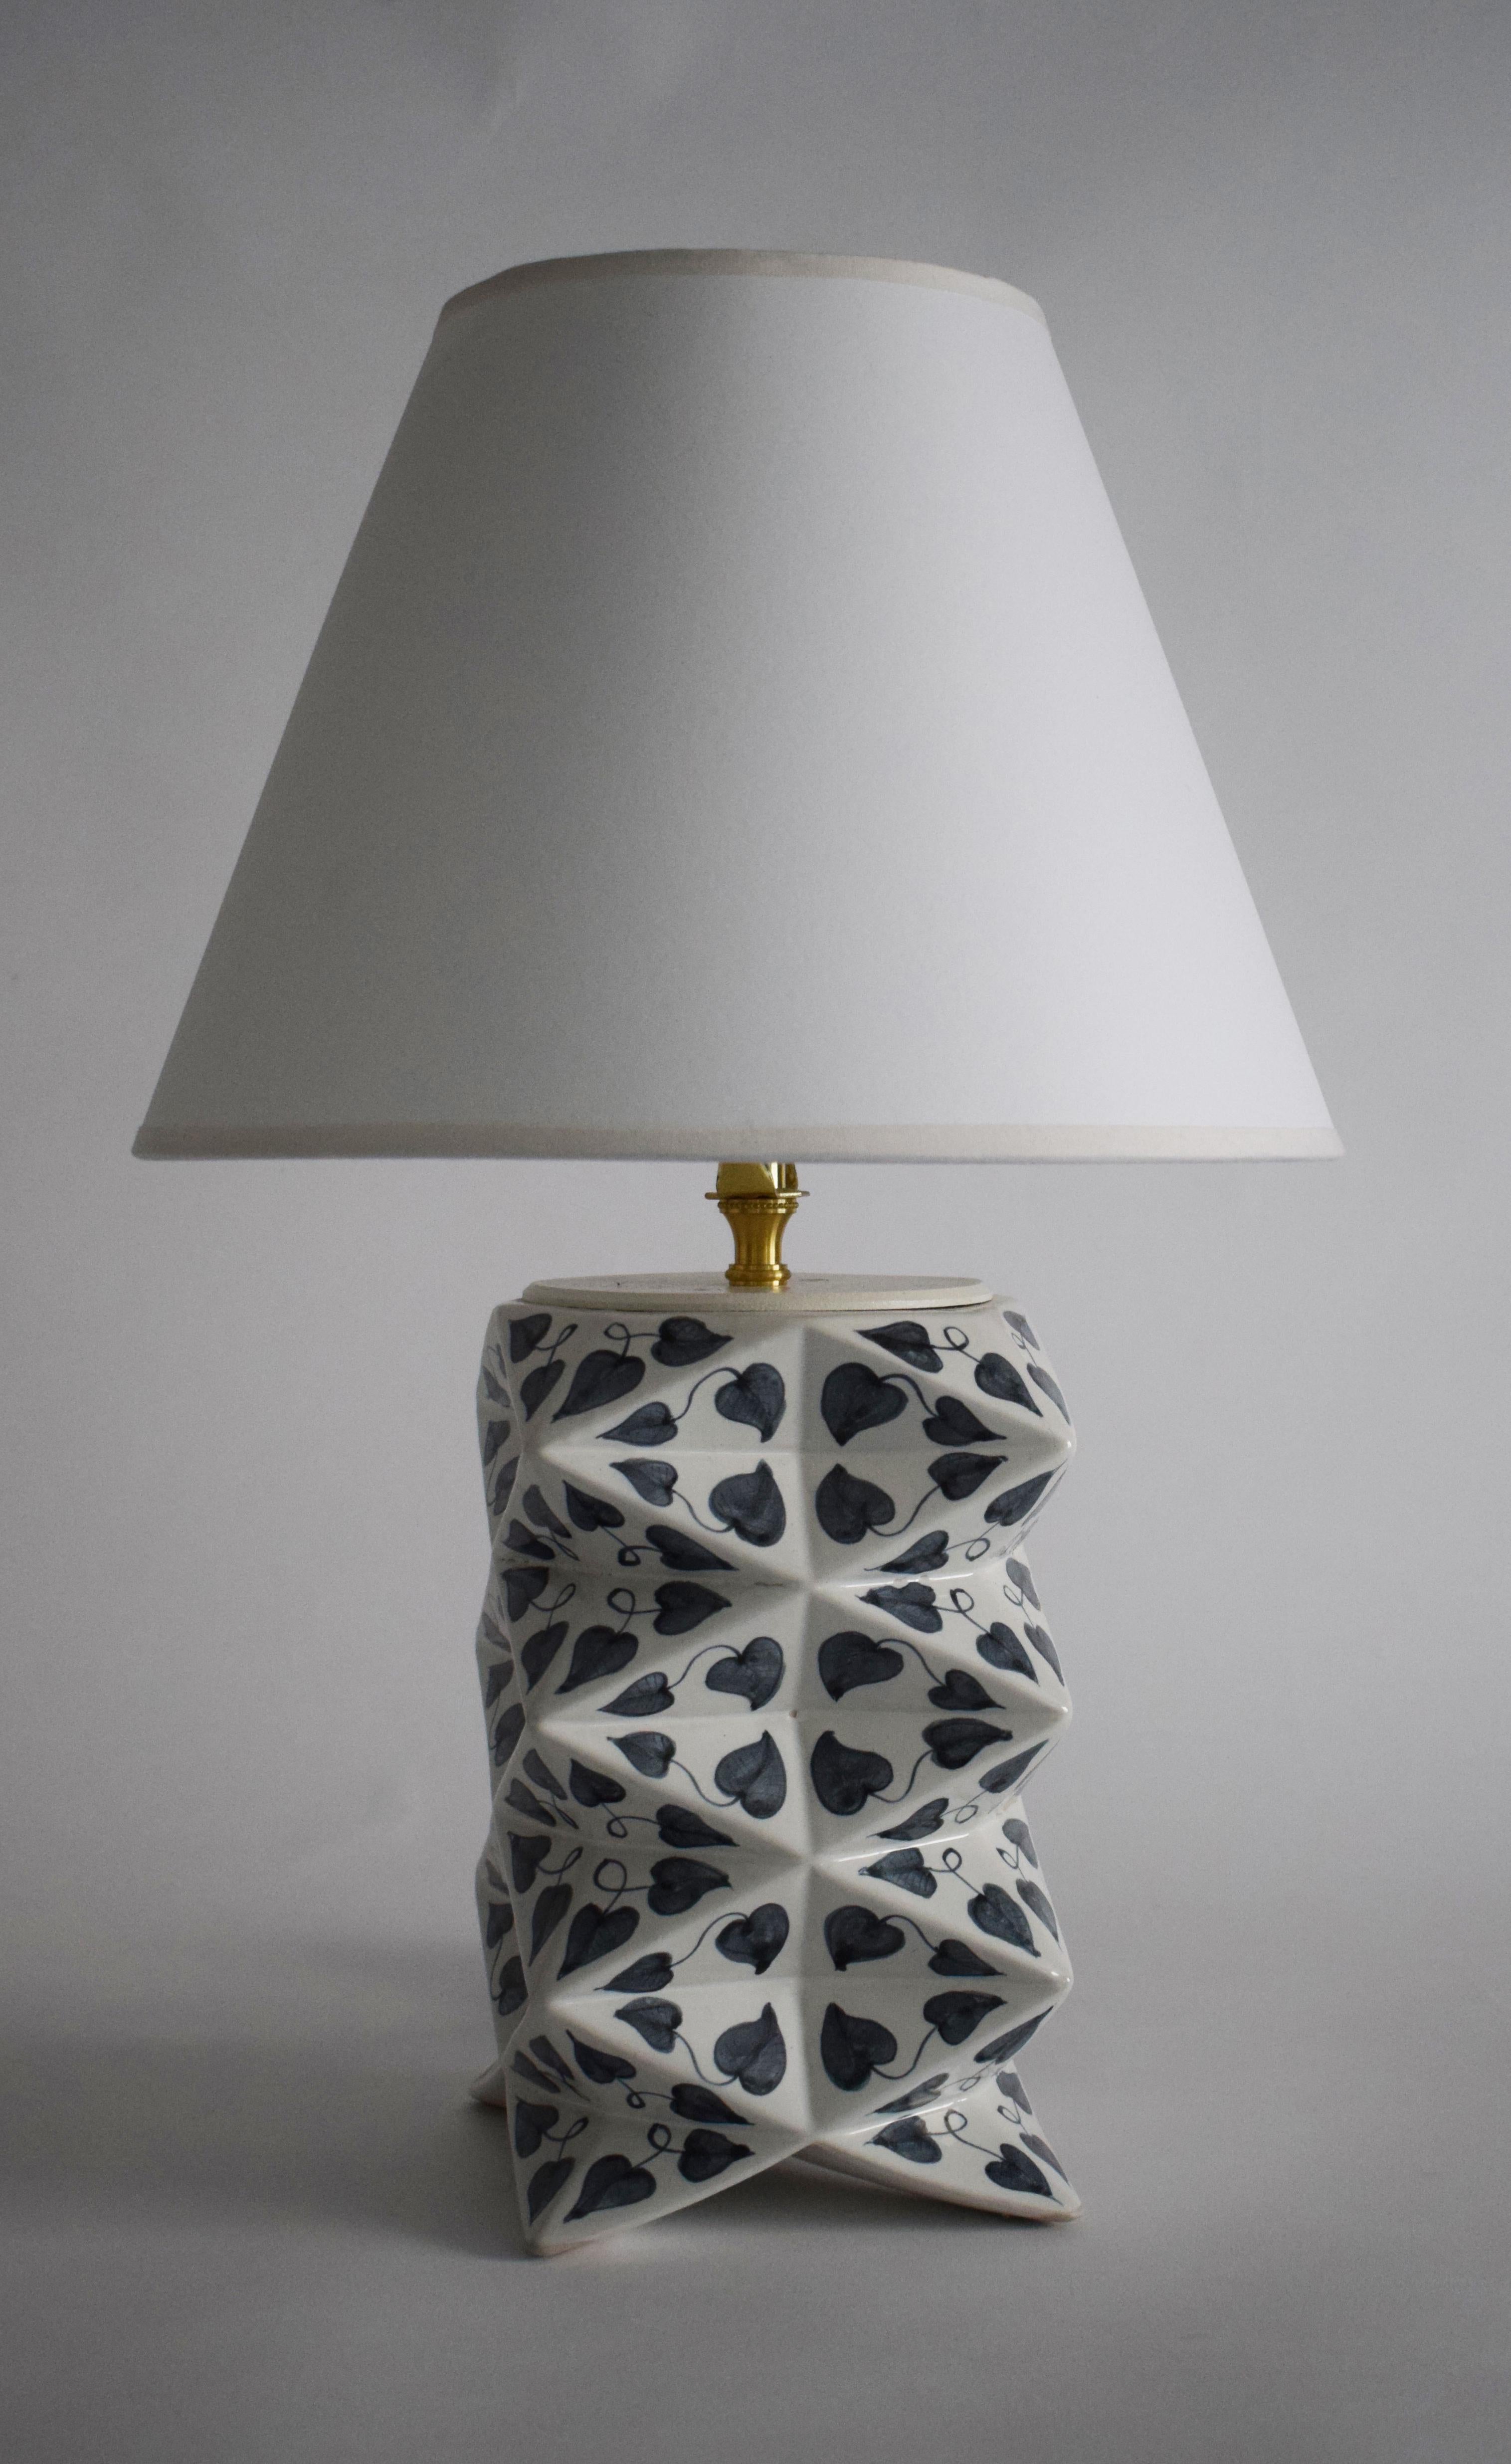 A hand-painted ceramic table lamp meticulously crafted in Vietnam to the specifications of James Hicks. This lamp harmoniously blends modern 3D form with the Vietnamese tradition of hand-painted ceramics, representing a fusion of diverse cultural